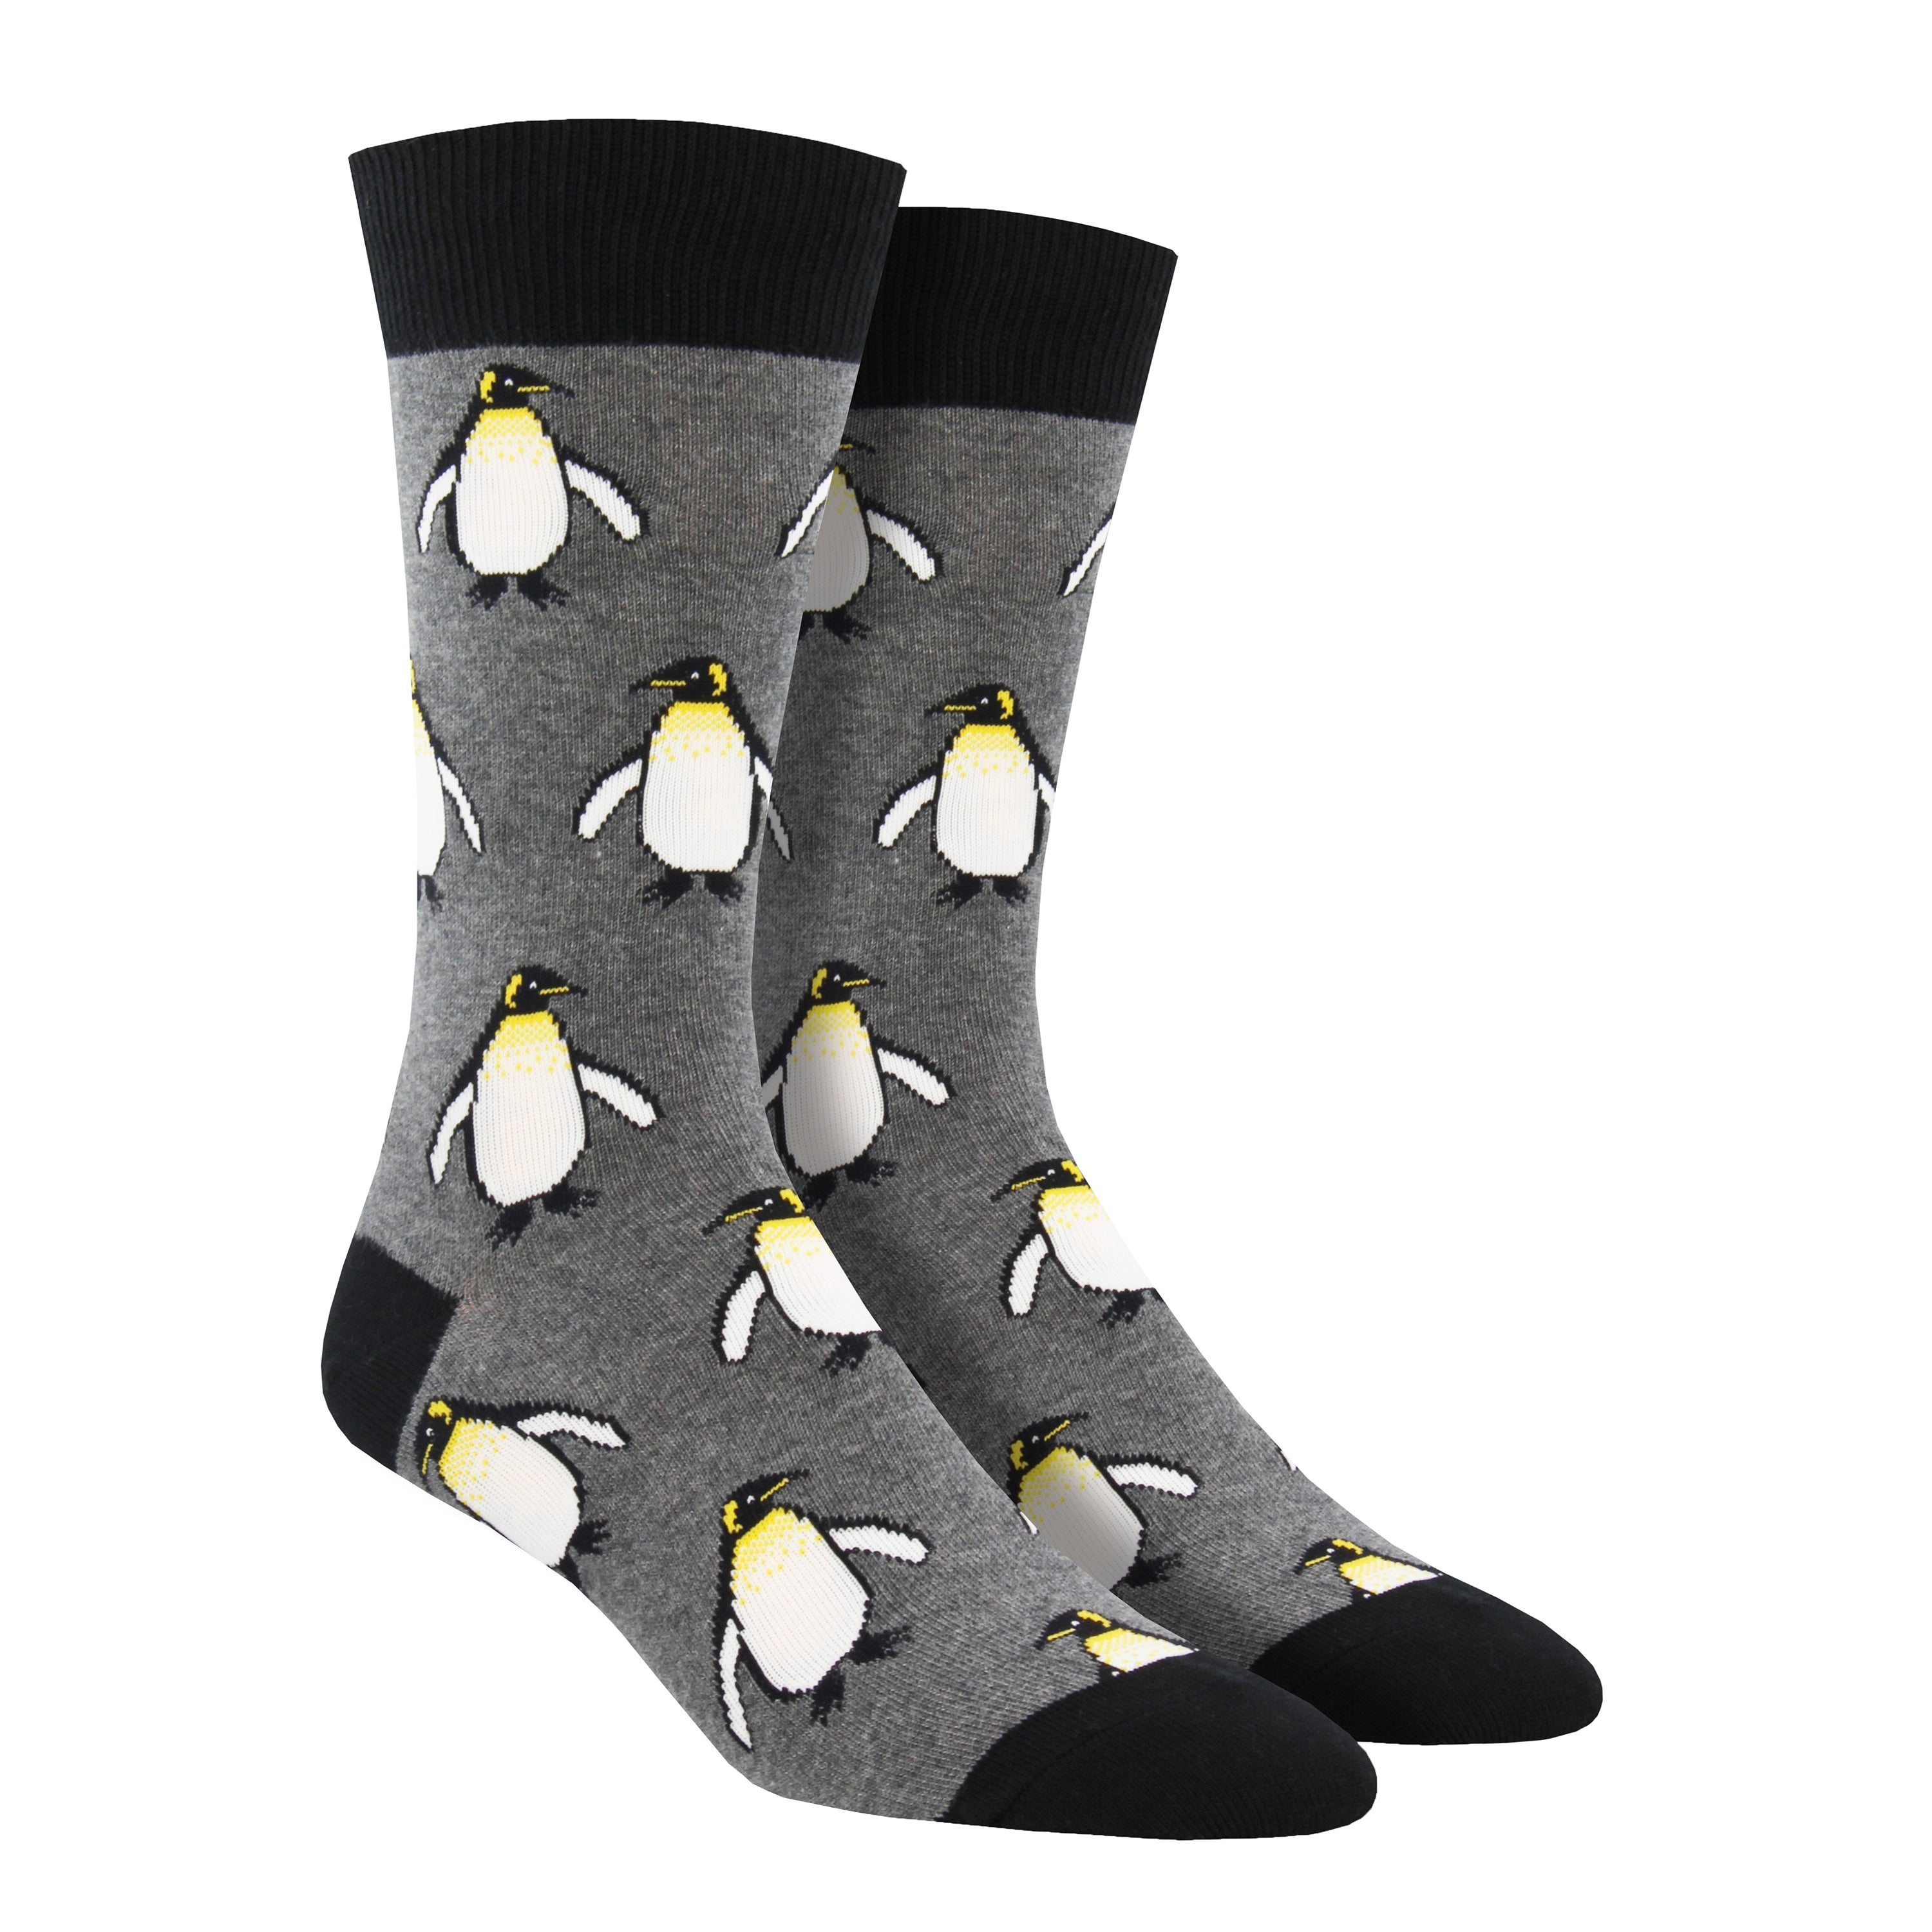 Shown on a foot form, a pair of Socksmith's gray cotton men's crew socks with black cuff/heel/toe and all-over pattern regal emperor penguins